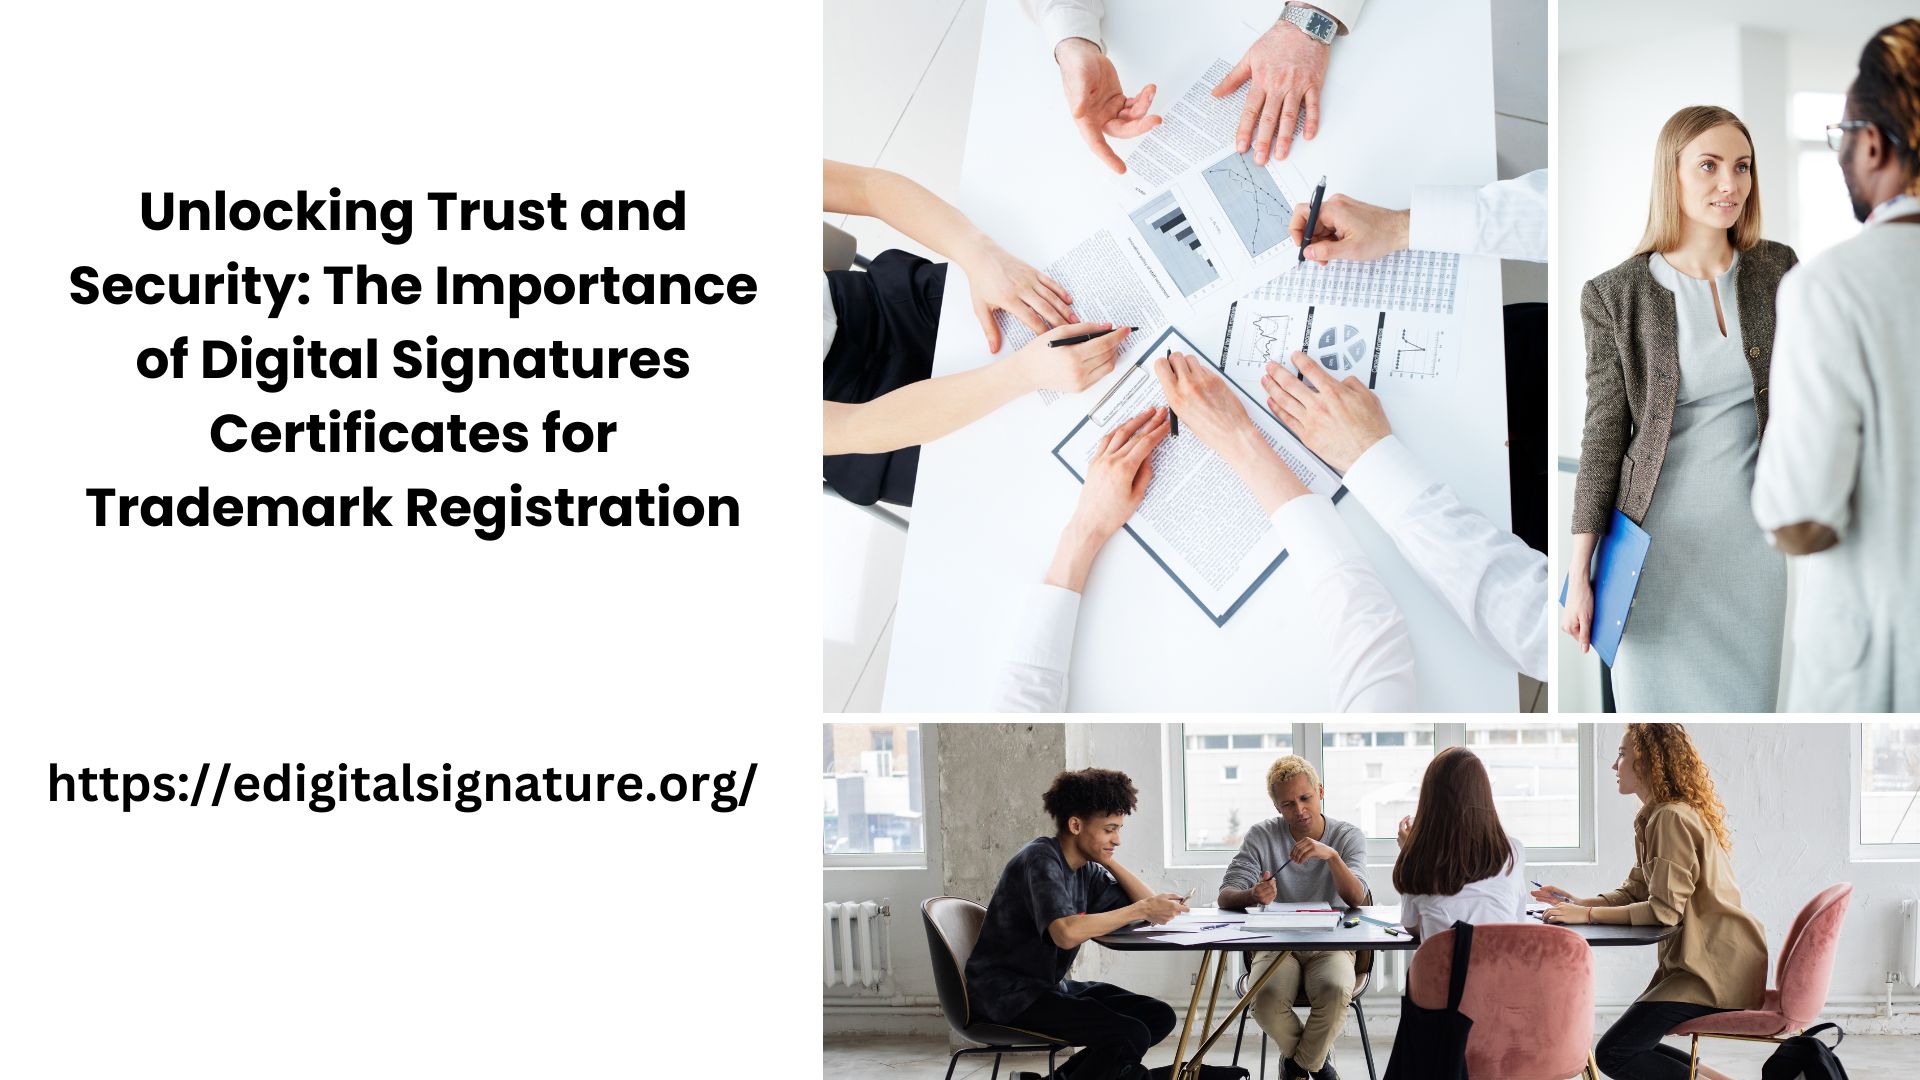 Unlocking Trust and Security: The Importance of Digital Signatures Certificates for Trademark Registration